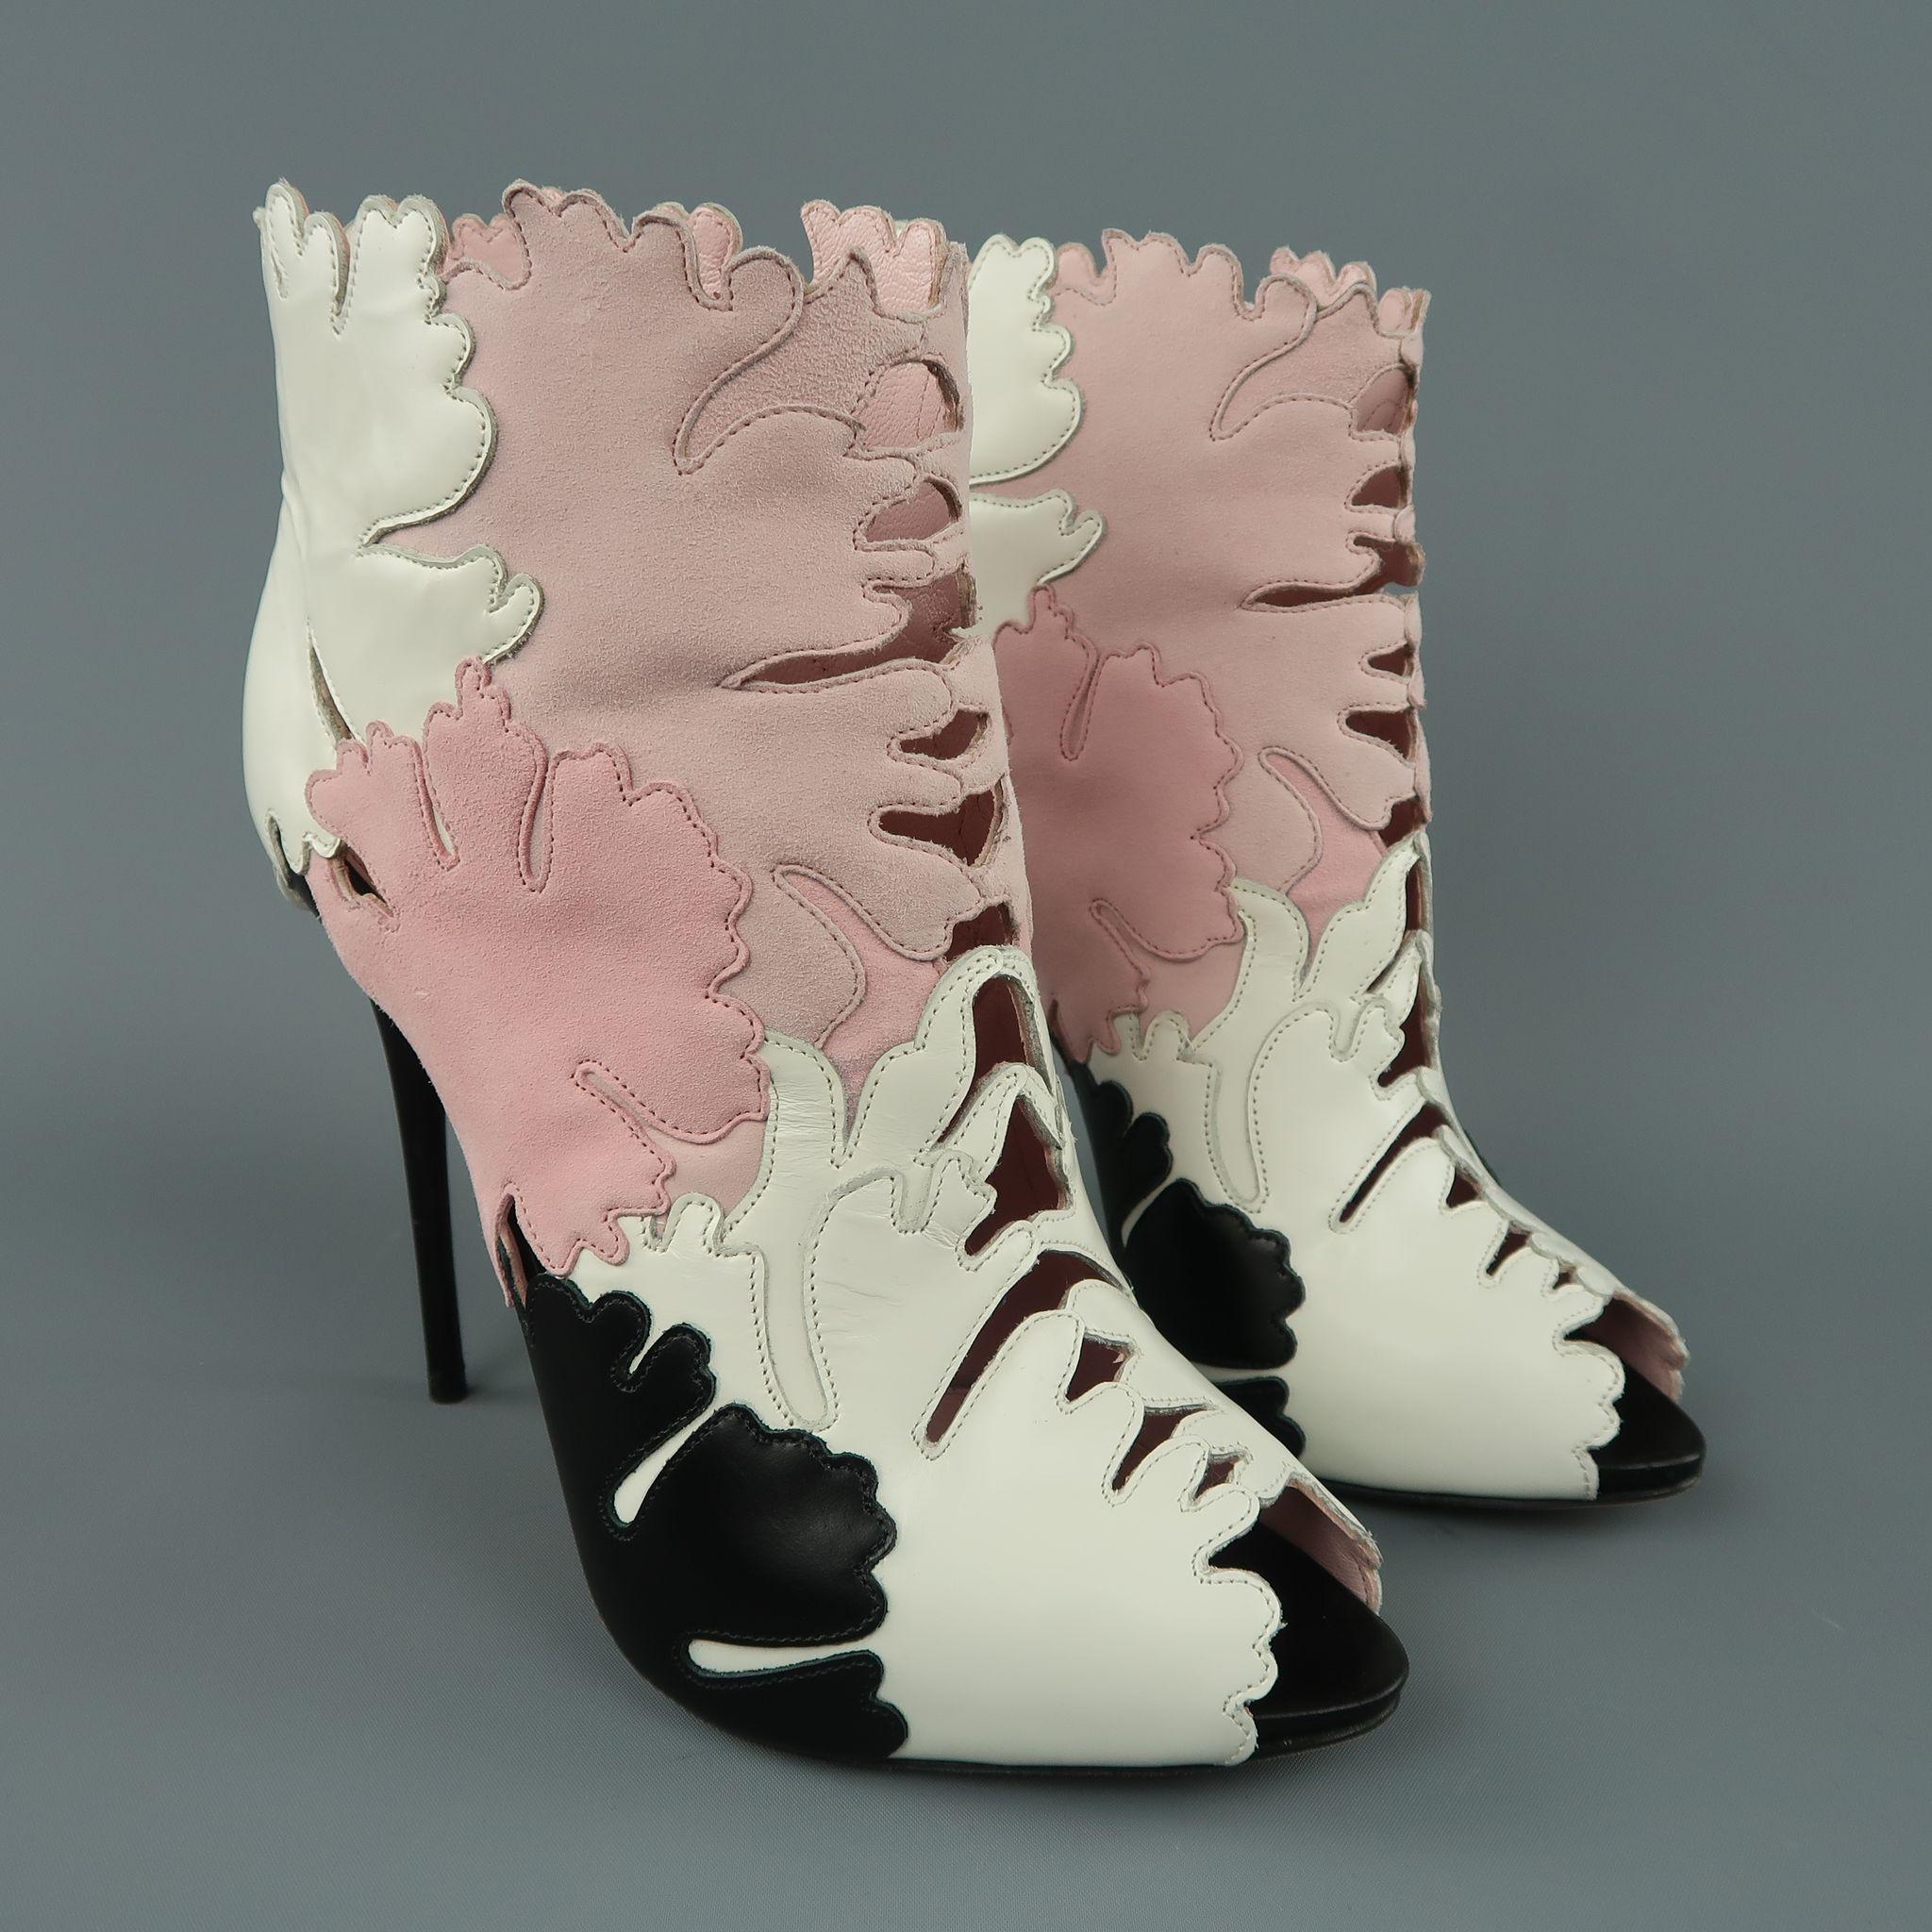 ALEXANDER MCQUEEN booties come in patch work leaf cutouts in pink, white, and black suede and leather with a peep toe, low concealed platform, and skinny stiletto heel. Worn once. Made in Italy.

Excellent Pre-Owned Condition.
Marked: IT